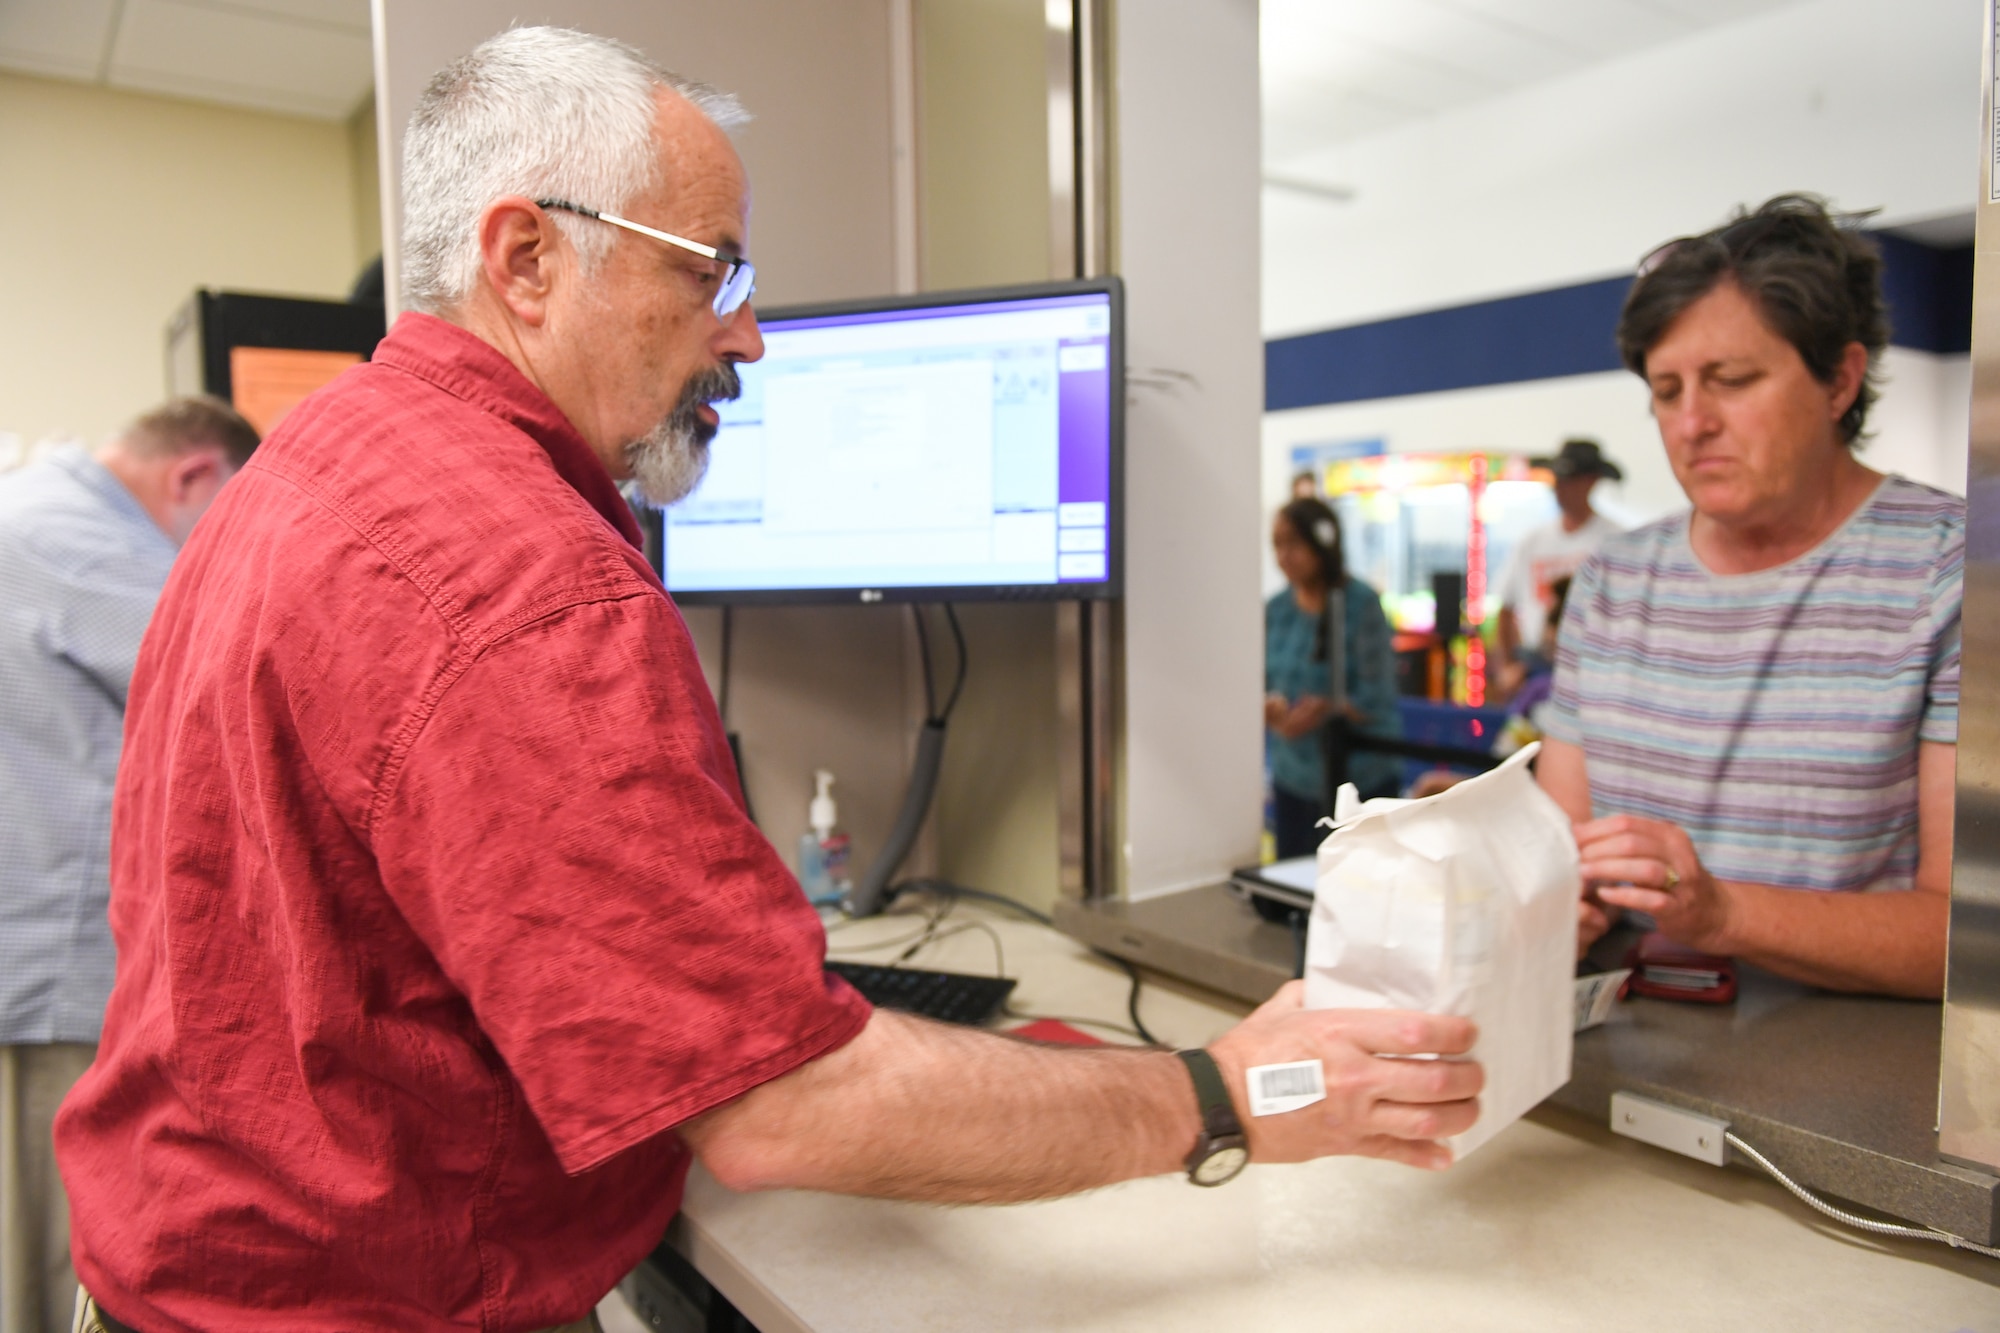 Pharmacy technician Andy Pollaehne hands a prescription to Cary Fisher at the Satellite Pharmacy located inside the AAFES Base Exchange at Hill Air Force Base. Beginning Nov. 2, the Satellite Pharmacy windows will reopen.